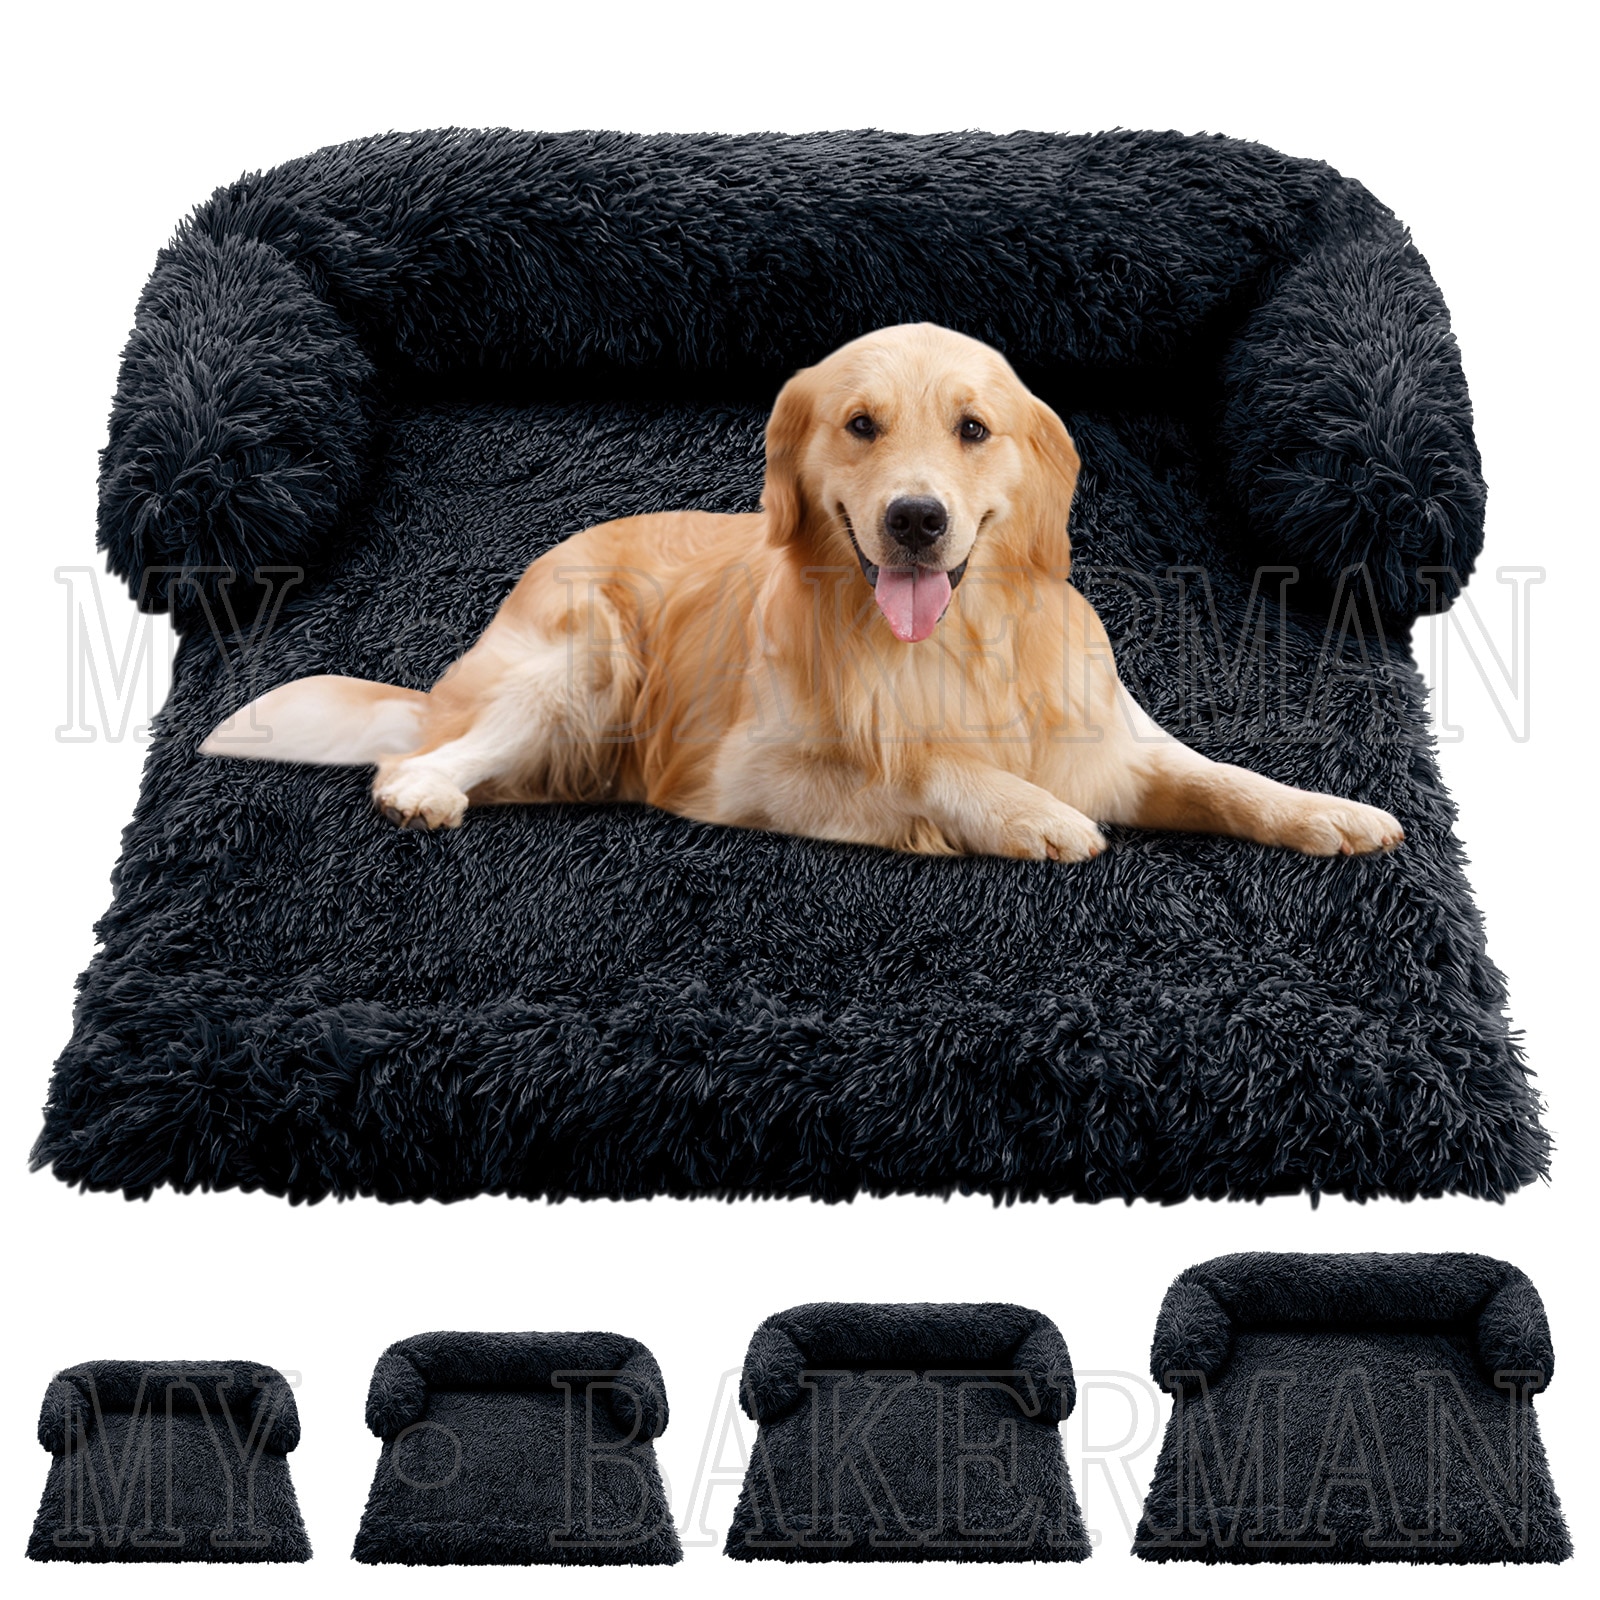 1867154456 1 - Large Plush Dog Sofa Bed Couch Protector - thepamperedpooch-co, pet-beds, dog-beds